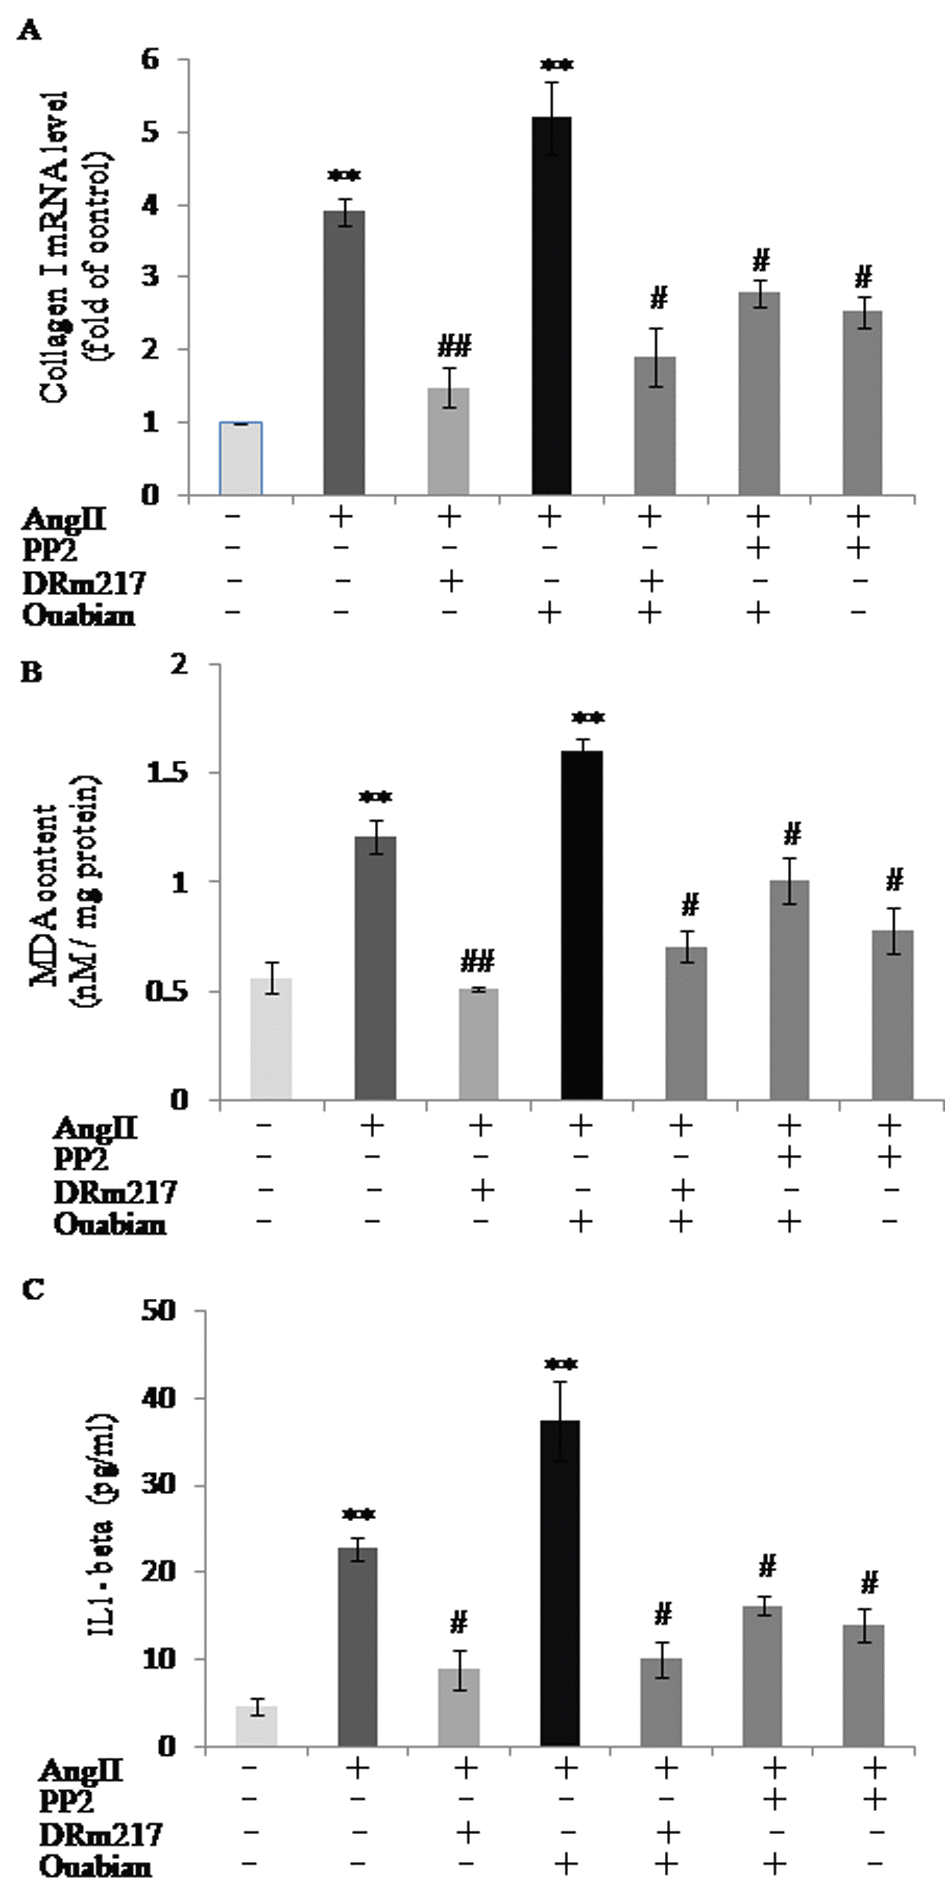 DRm217 and PP2 attenuated but ouabain strengthened AngII effect on increasing of collagen I, malondialdehyde and IL-1β in HK-2 cell. mRNA level of collagen I (A), contents of malondialdehyde contents (B), and contents of IL-1β (C) in different-treated cells. AngII increased the expression of collagen I, malondialdehyde and IL-1β, whereas, DRm217 and PP2 decreased but ouabian increased the expression of collagen I, malondialdehyde and IL-1β in AngII-treated cells. n=4. Means±SEM; * p, **ppp